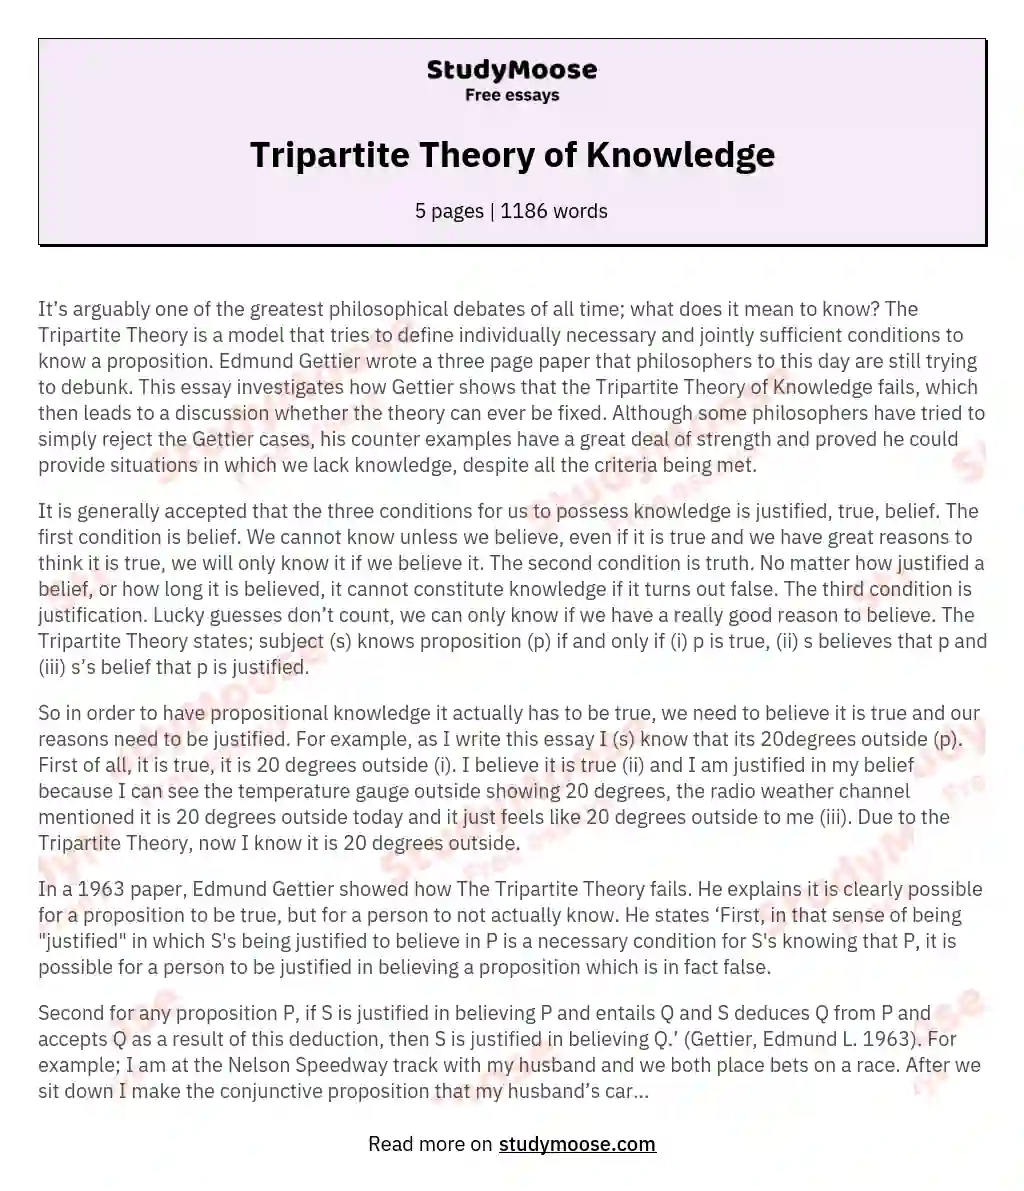 Tripartite Theory of Knowledge essay